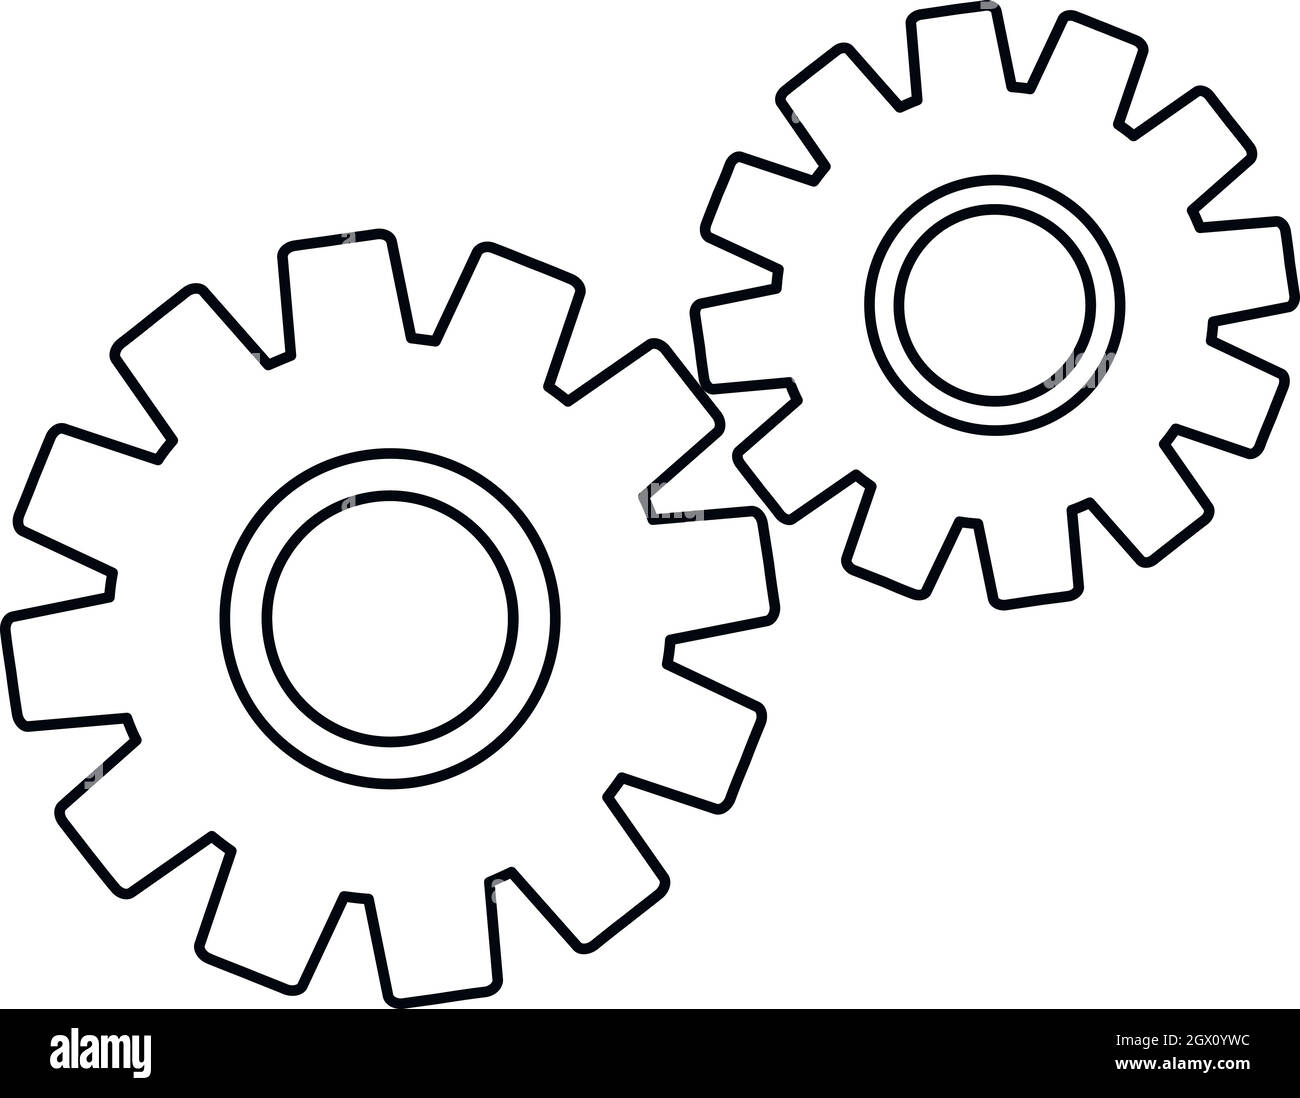 two gears clipart